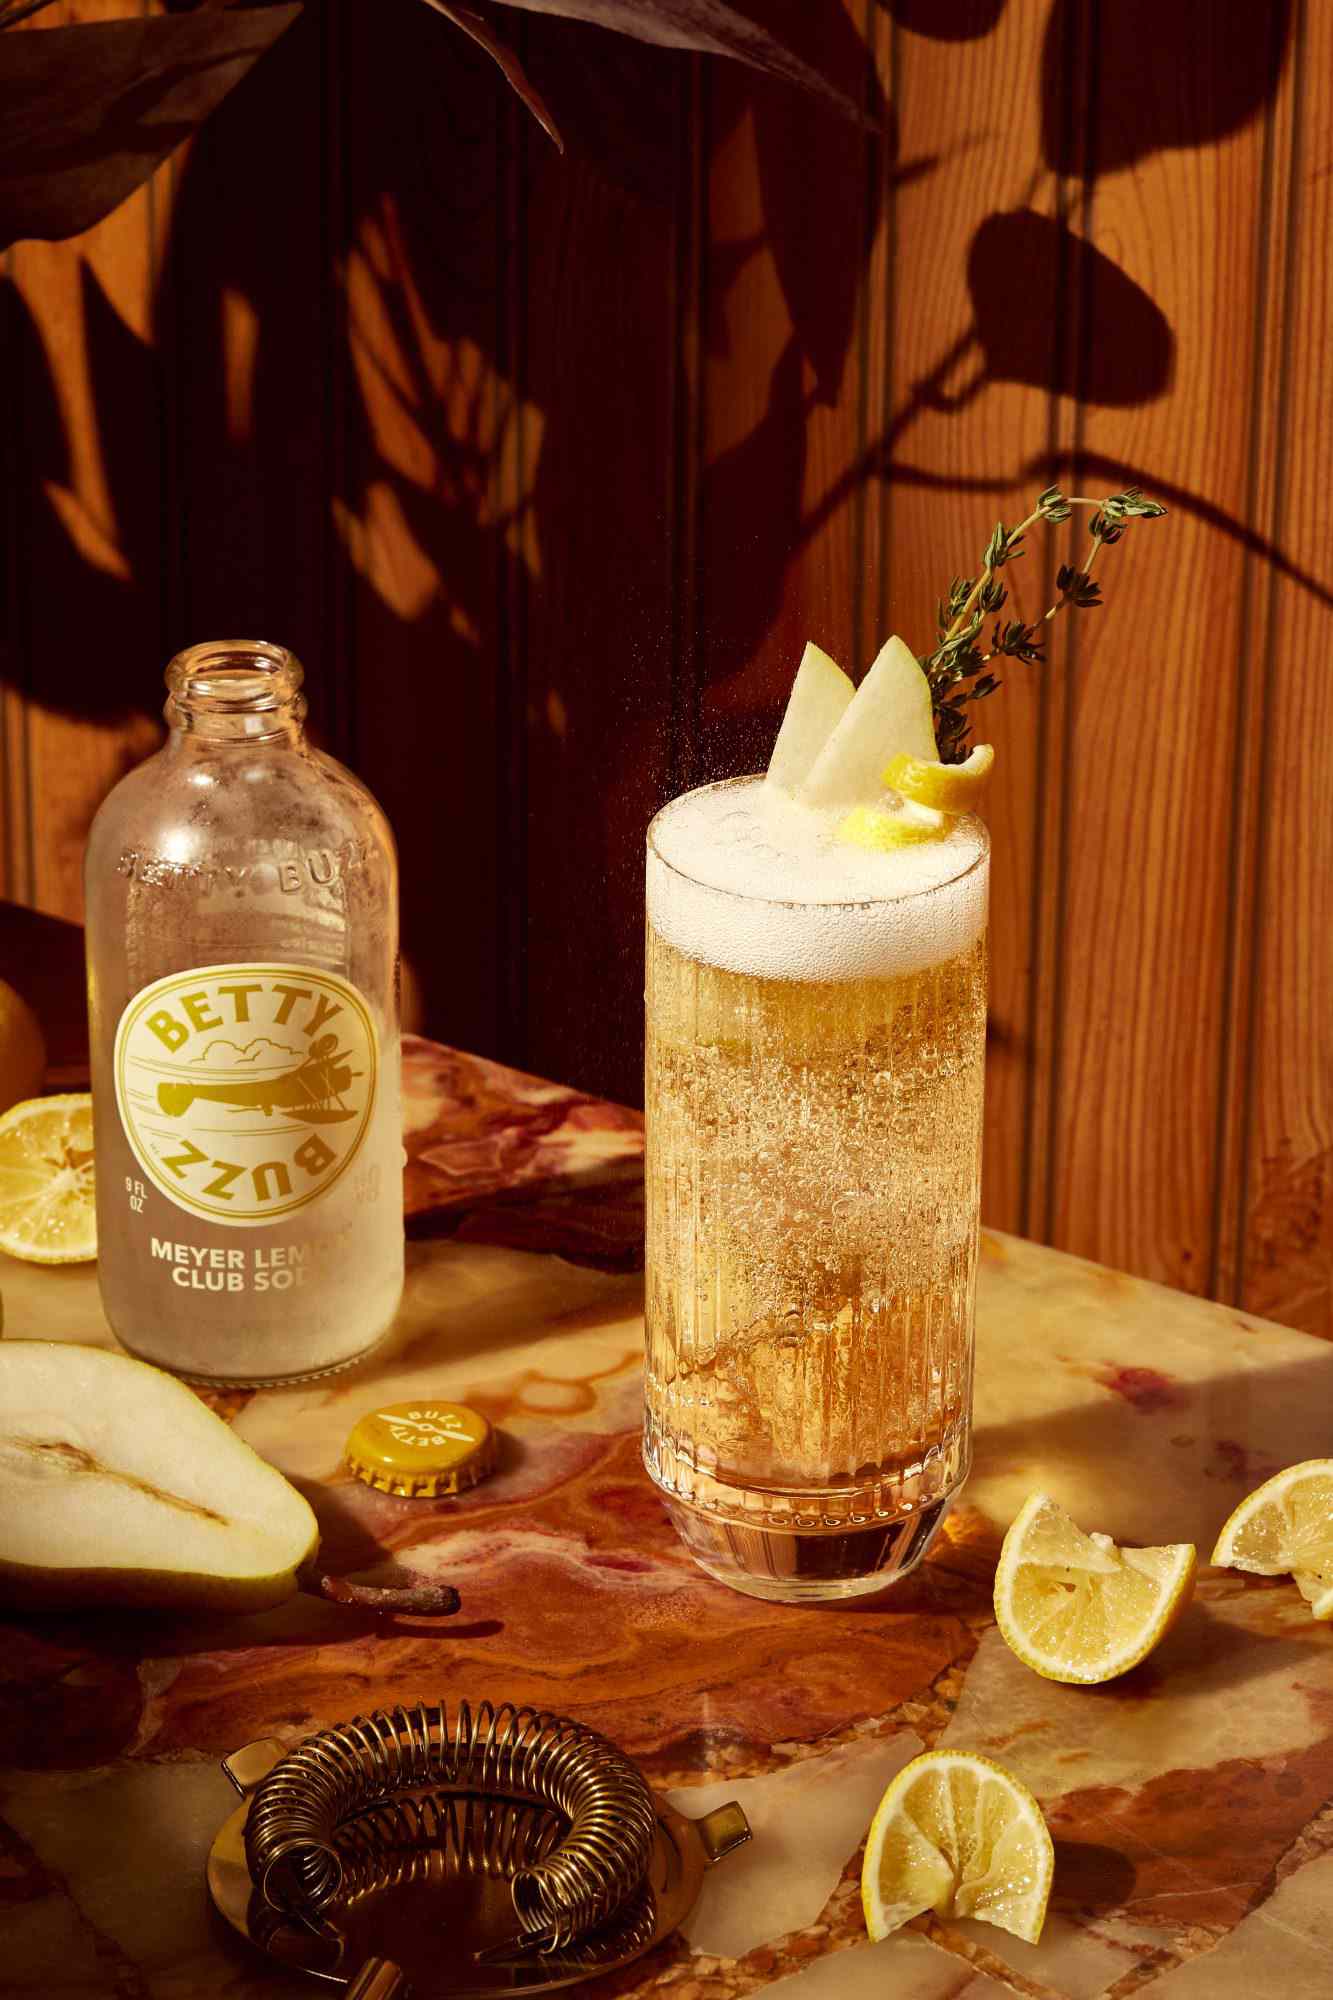 Betty Buzz's Perfect Pear cocktail